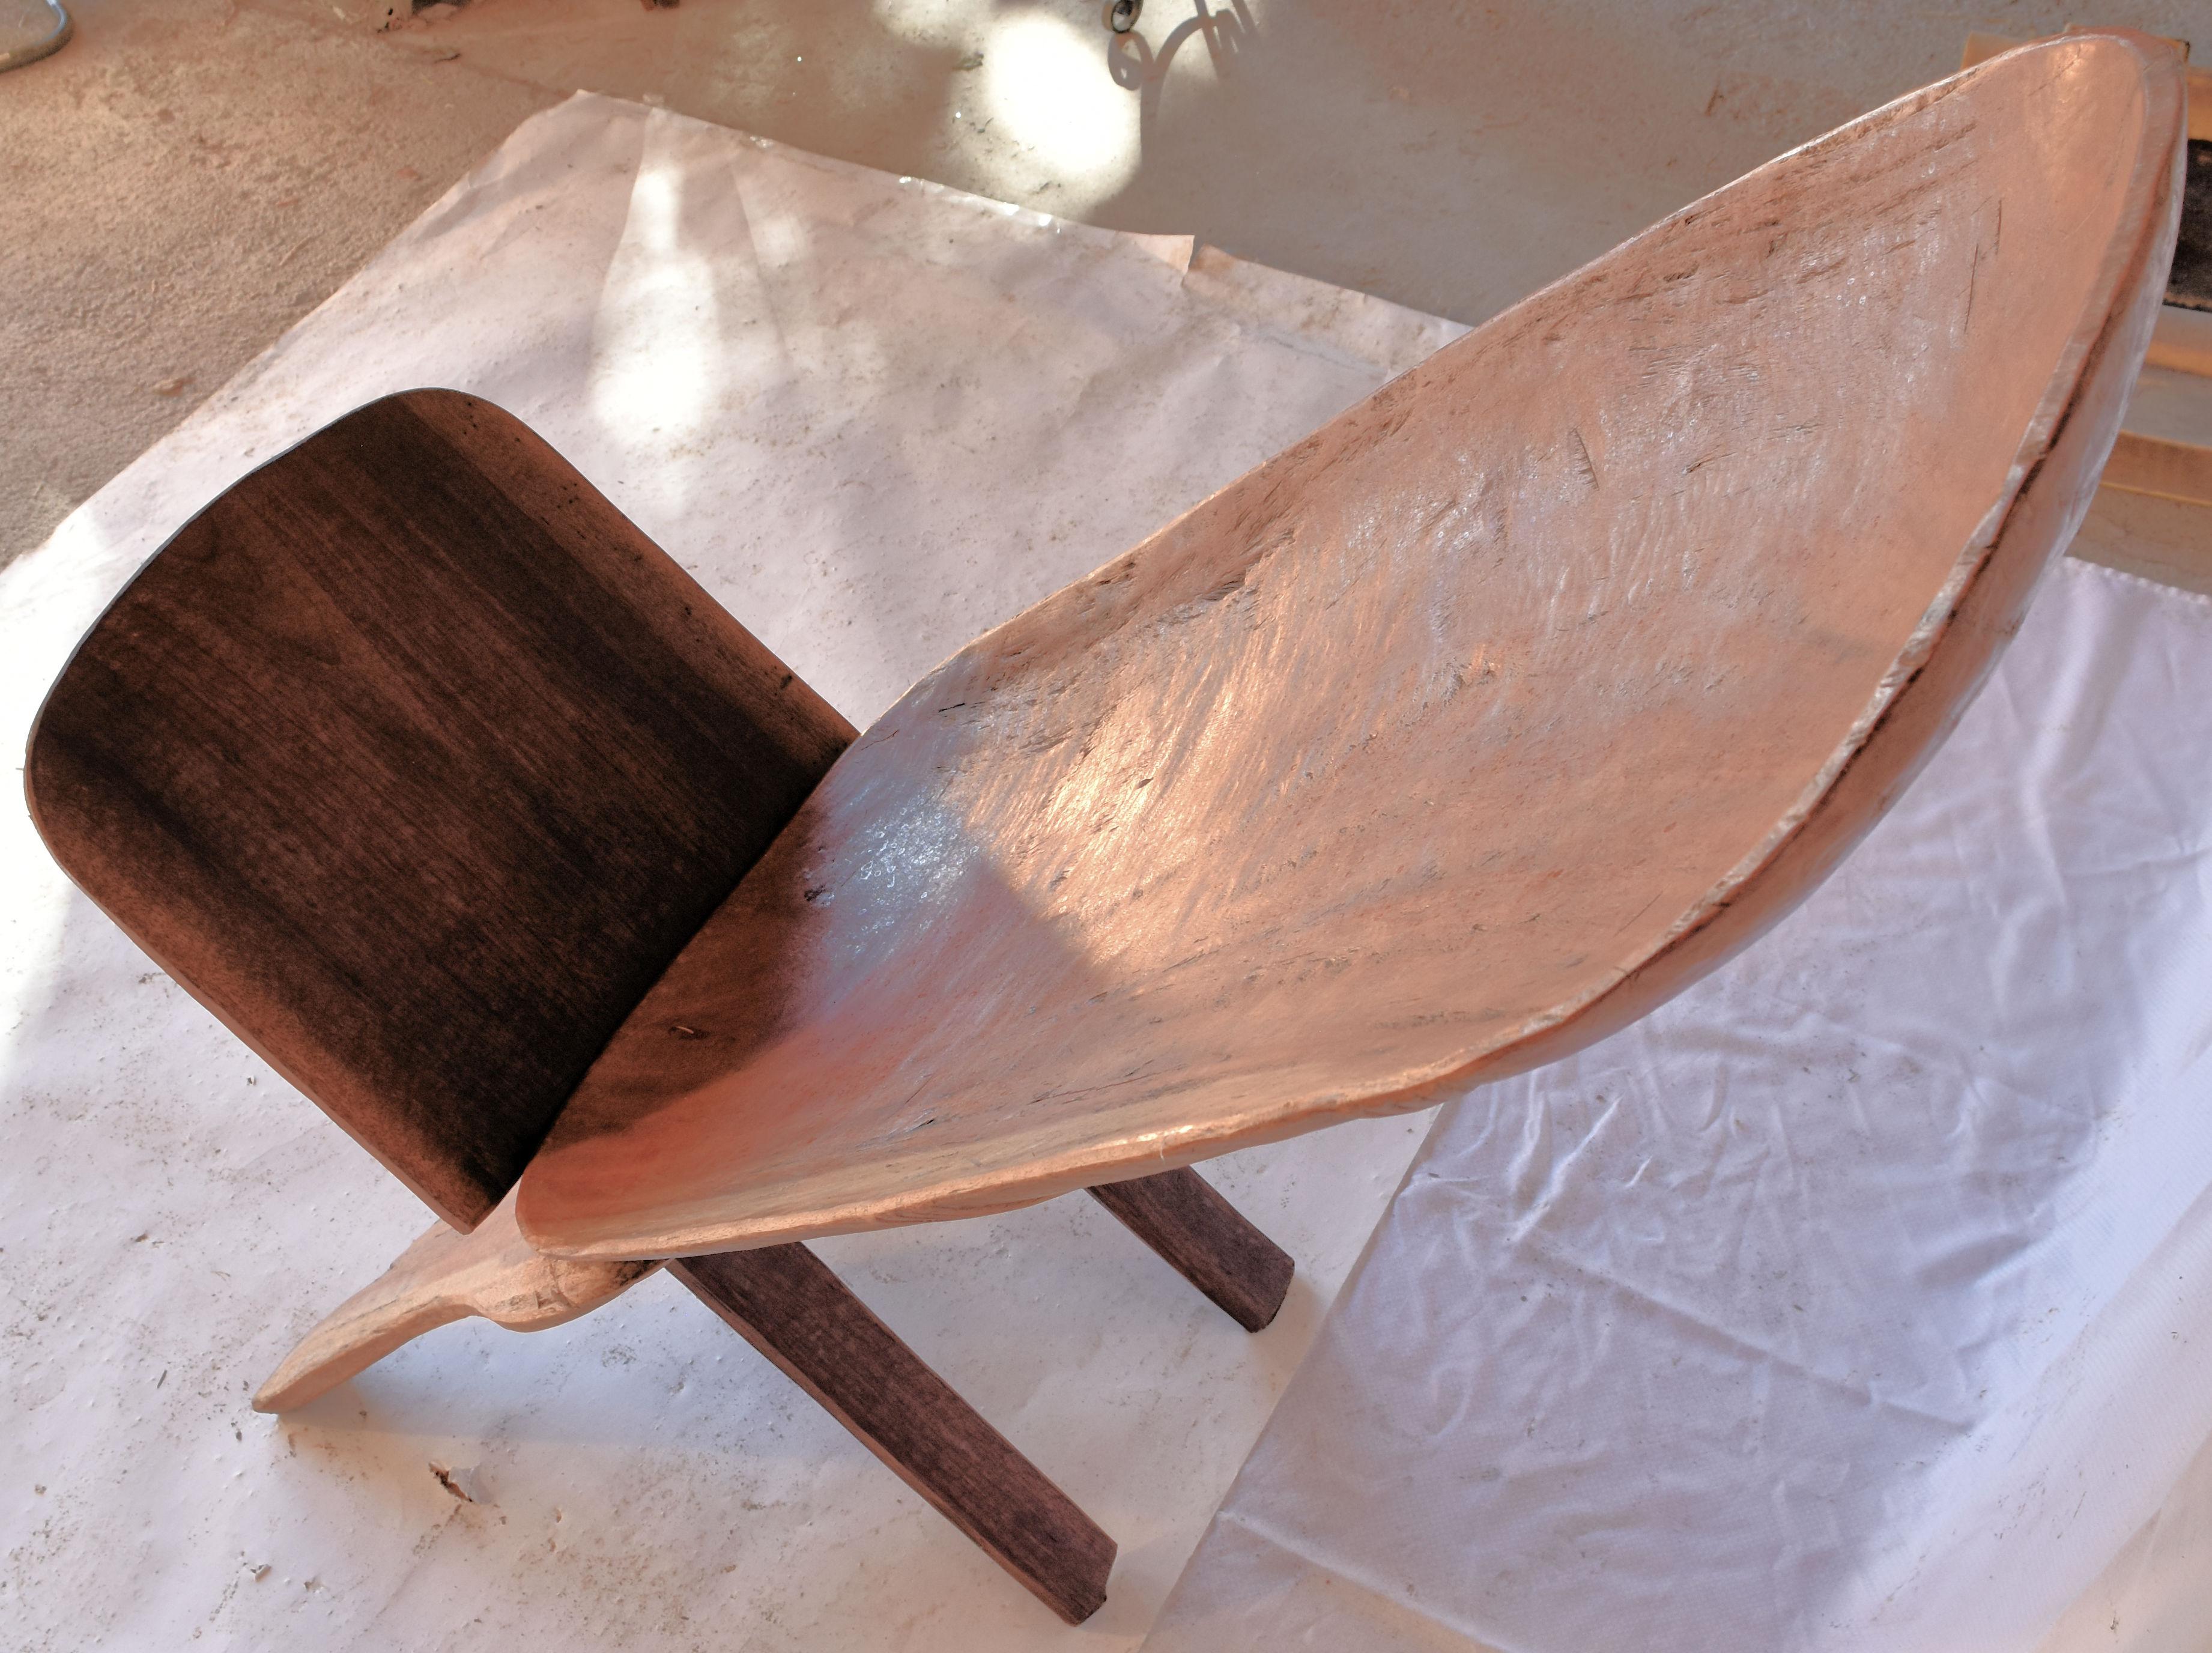 African Hand Carved Wooden Birthing Chair 2 Piece For Sale At 1stdibs